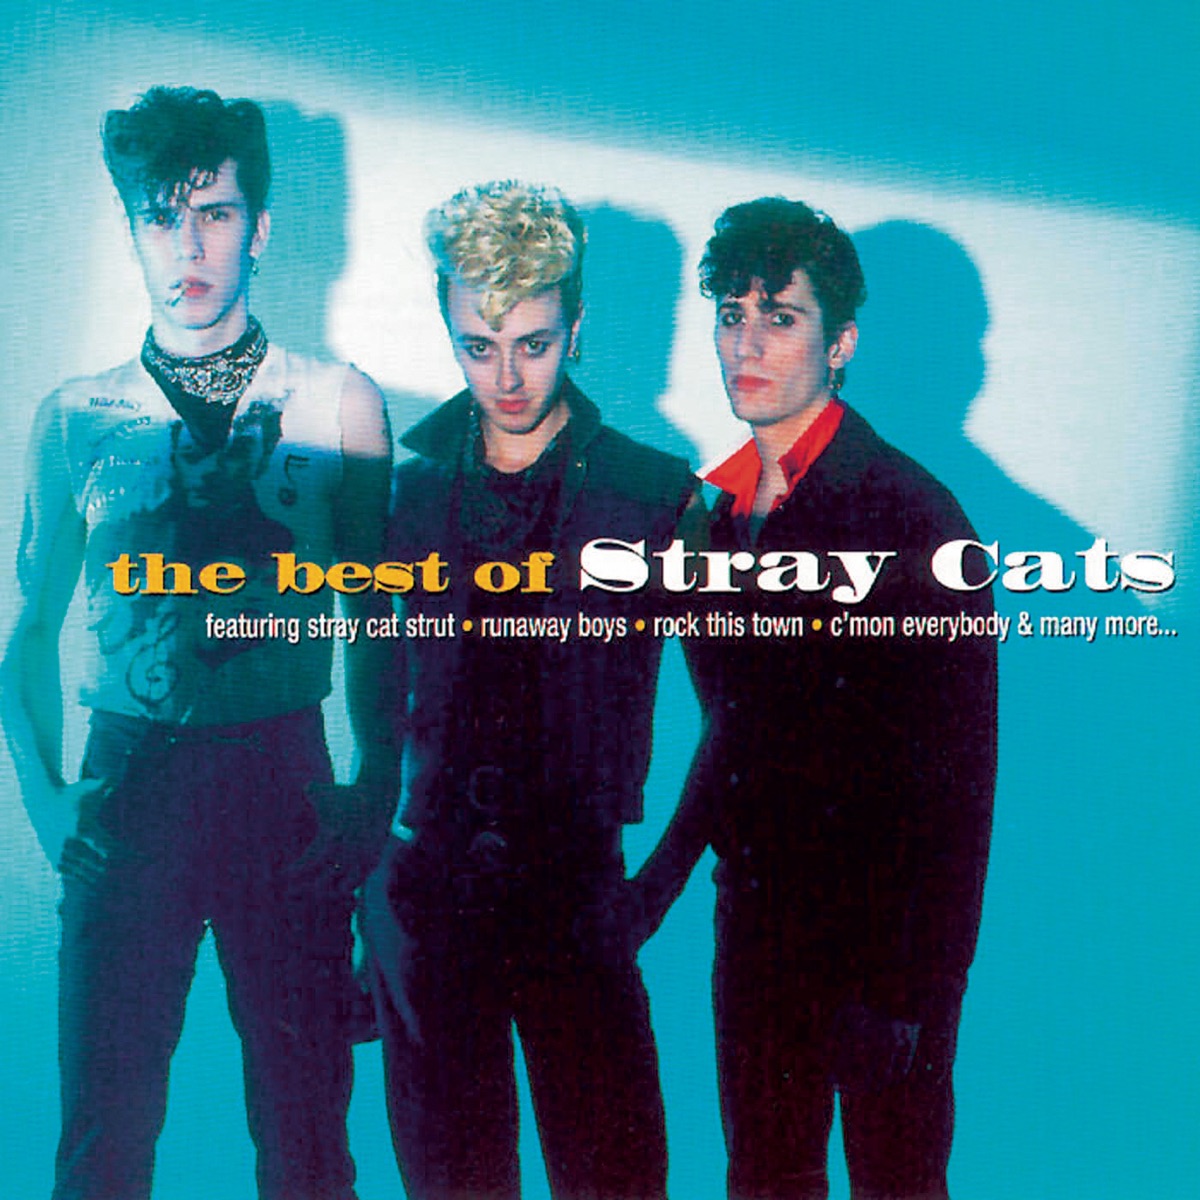 The Best of Stray Cats – Album par Stray Cats – Apple Music